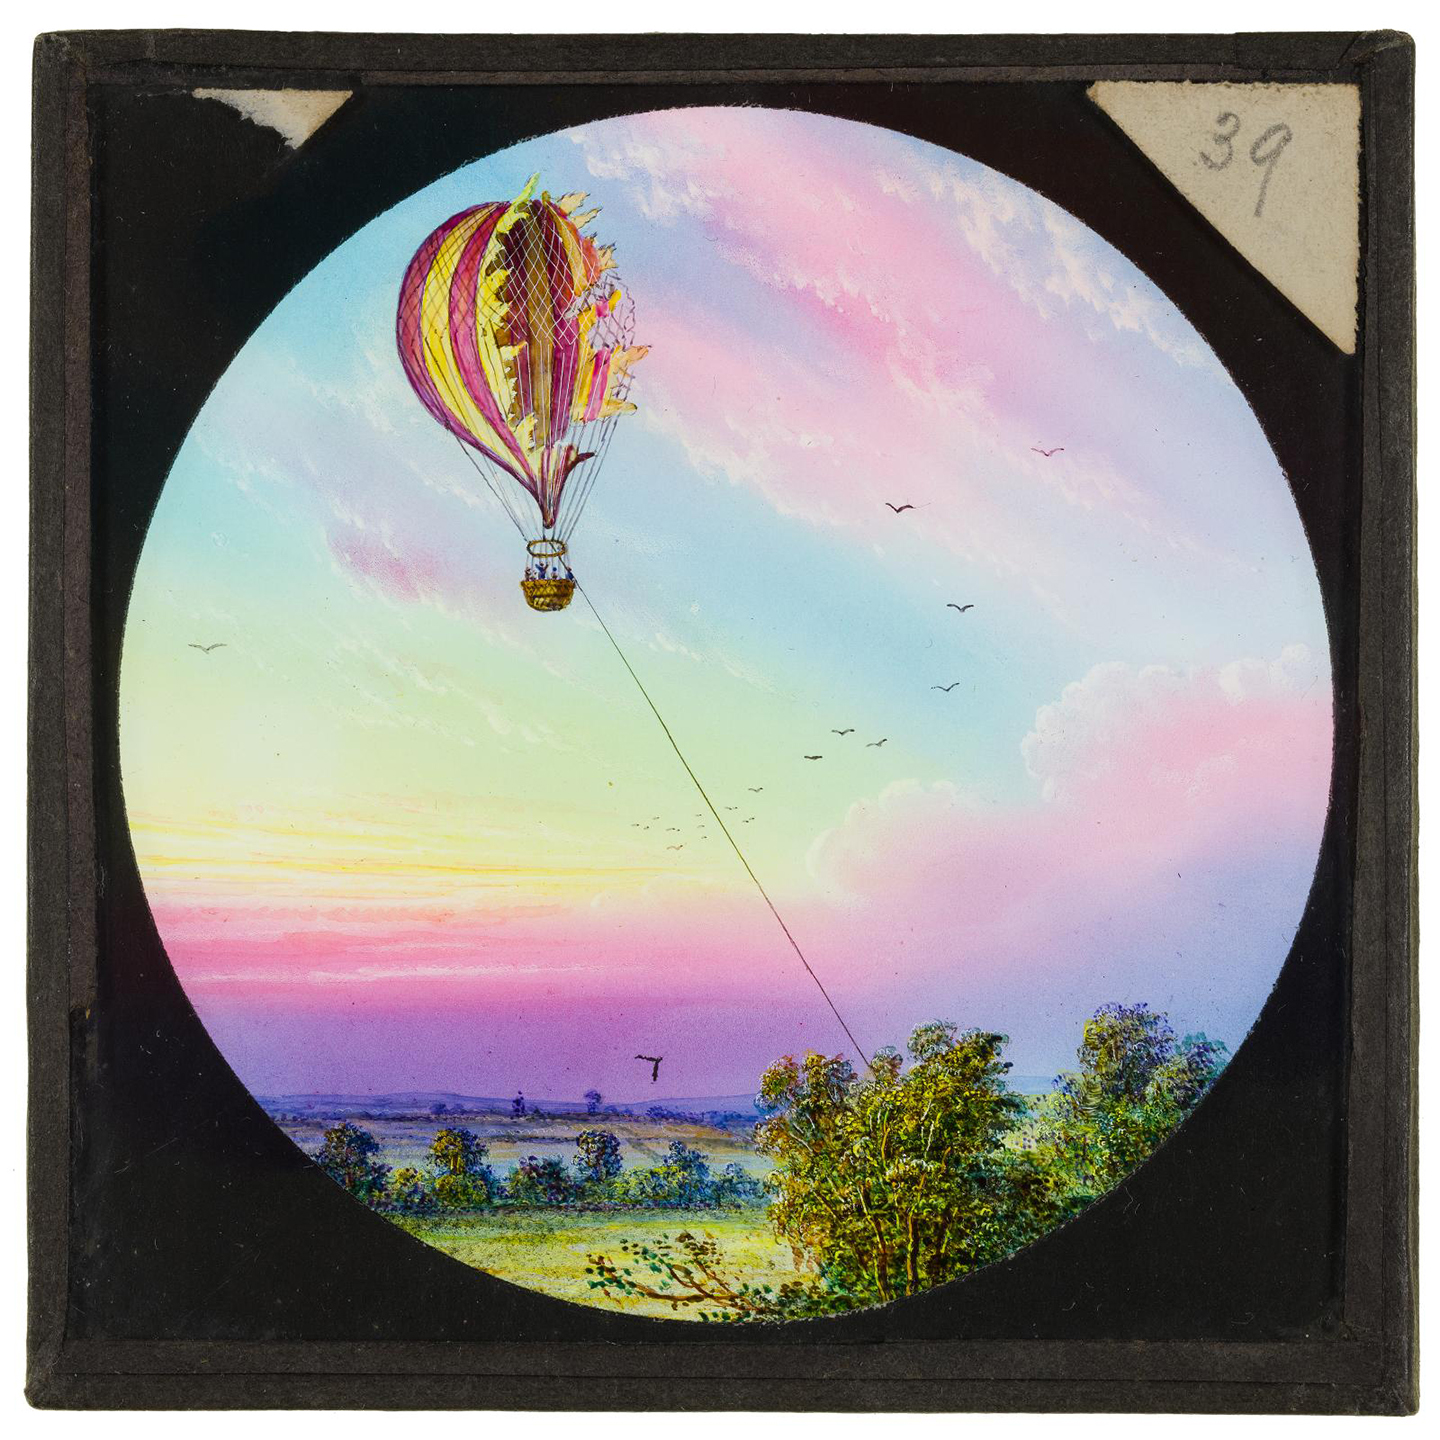 A hand-coloured slide of an engraving showing a tethered balloon which has torn in flight, with a sunrise behind